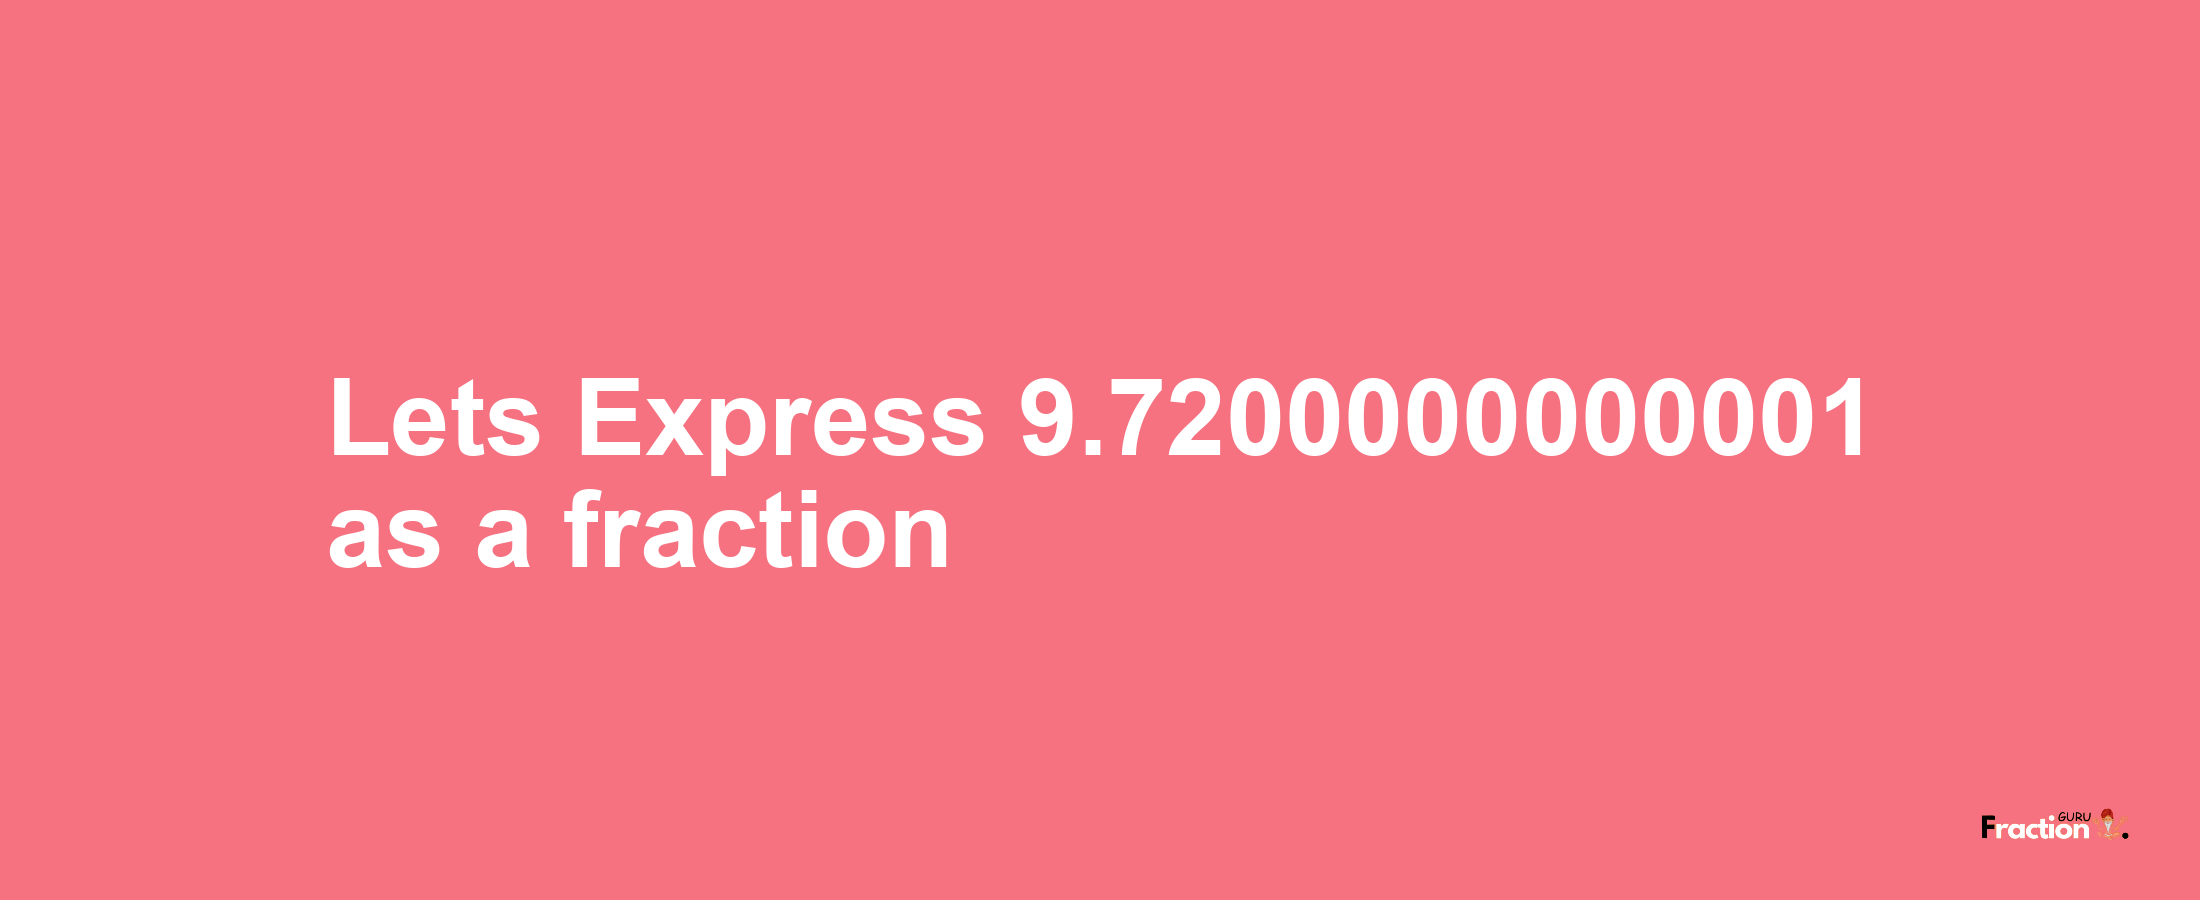 Lets Express 9.7200000000001 as afraction